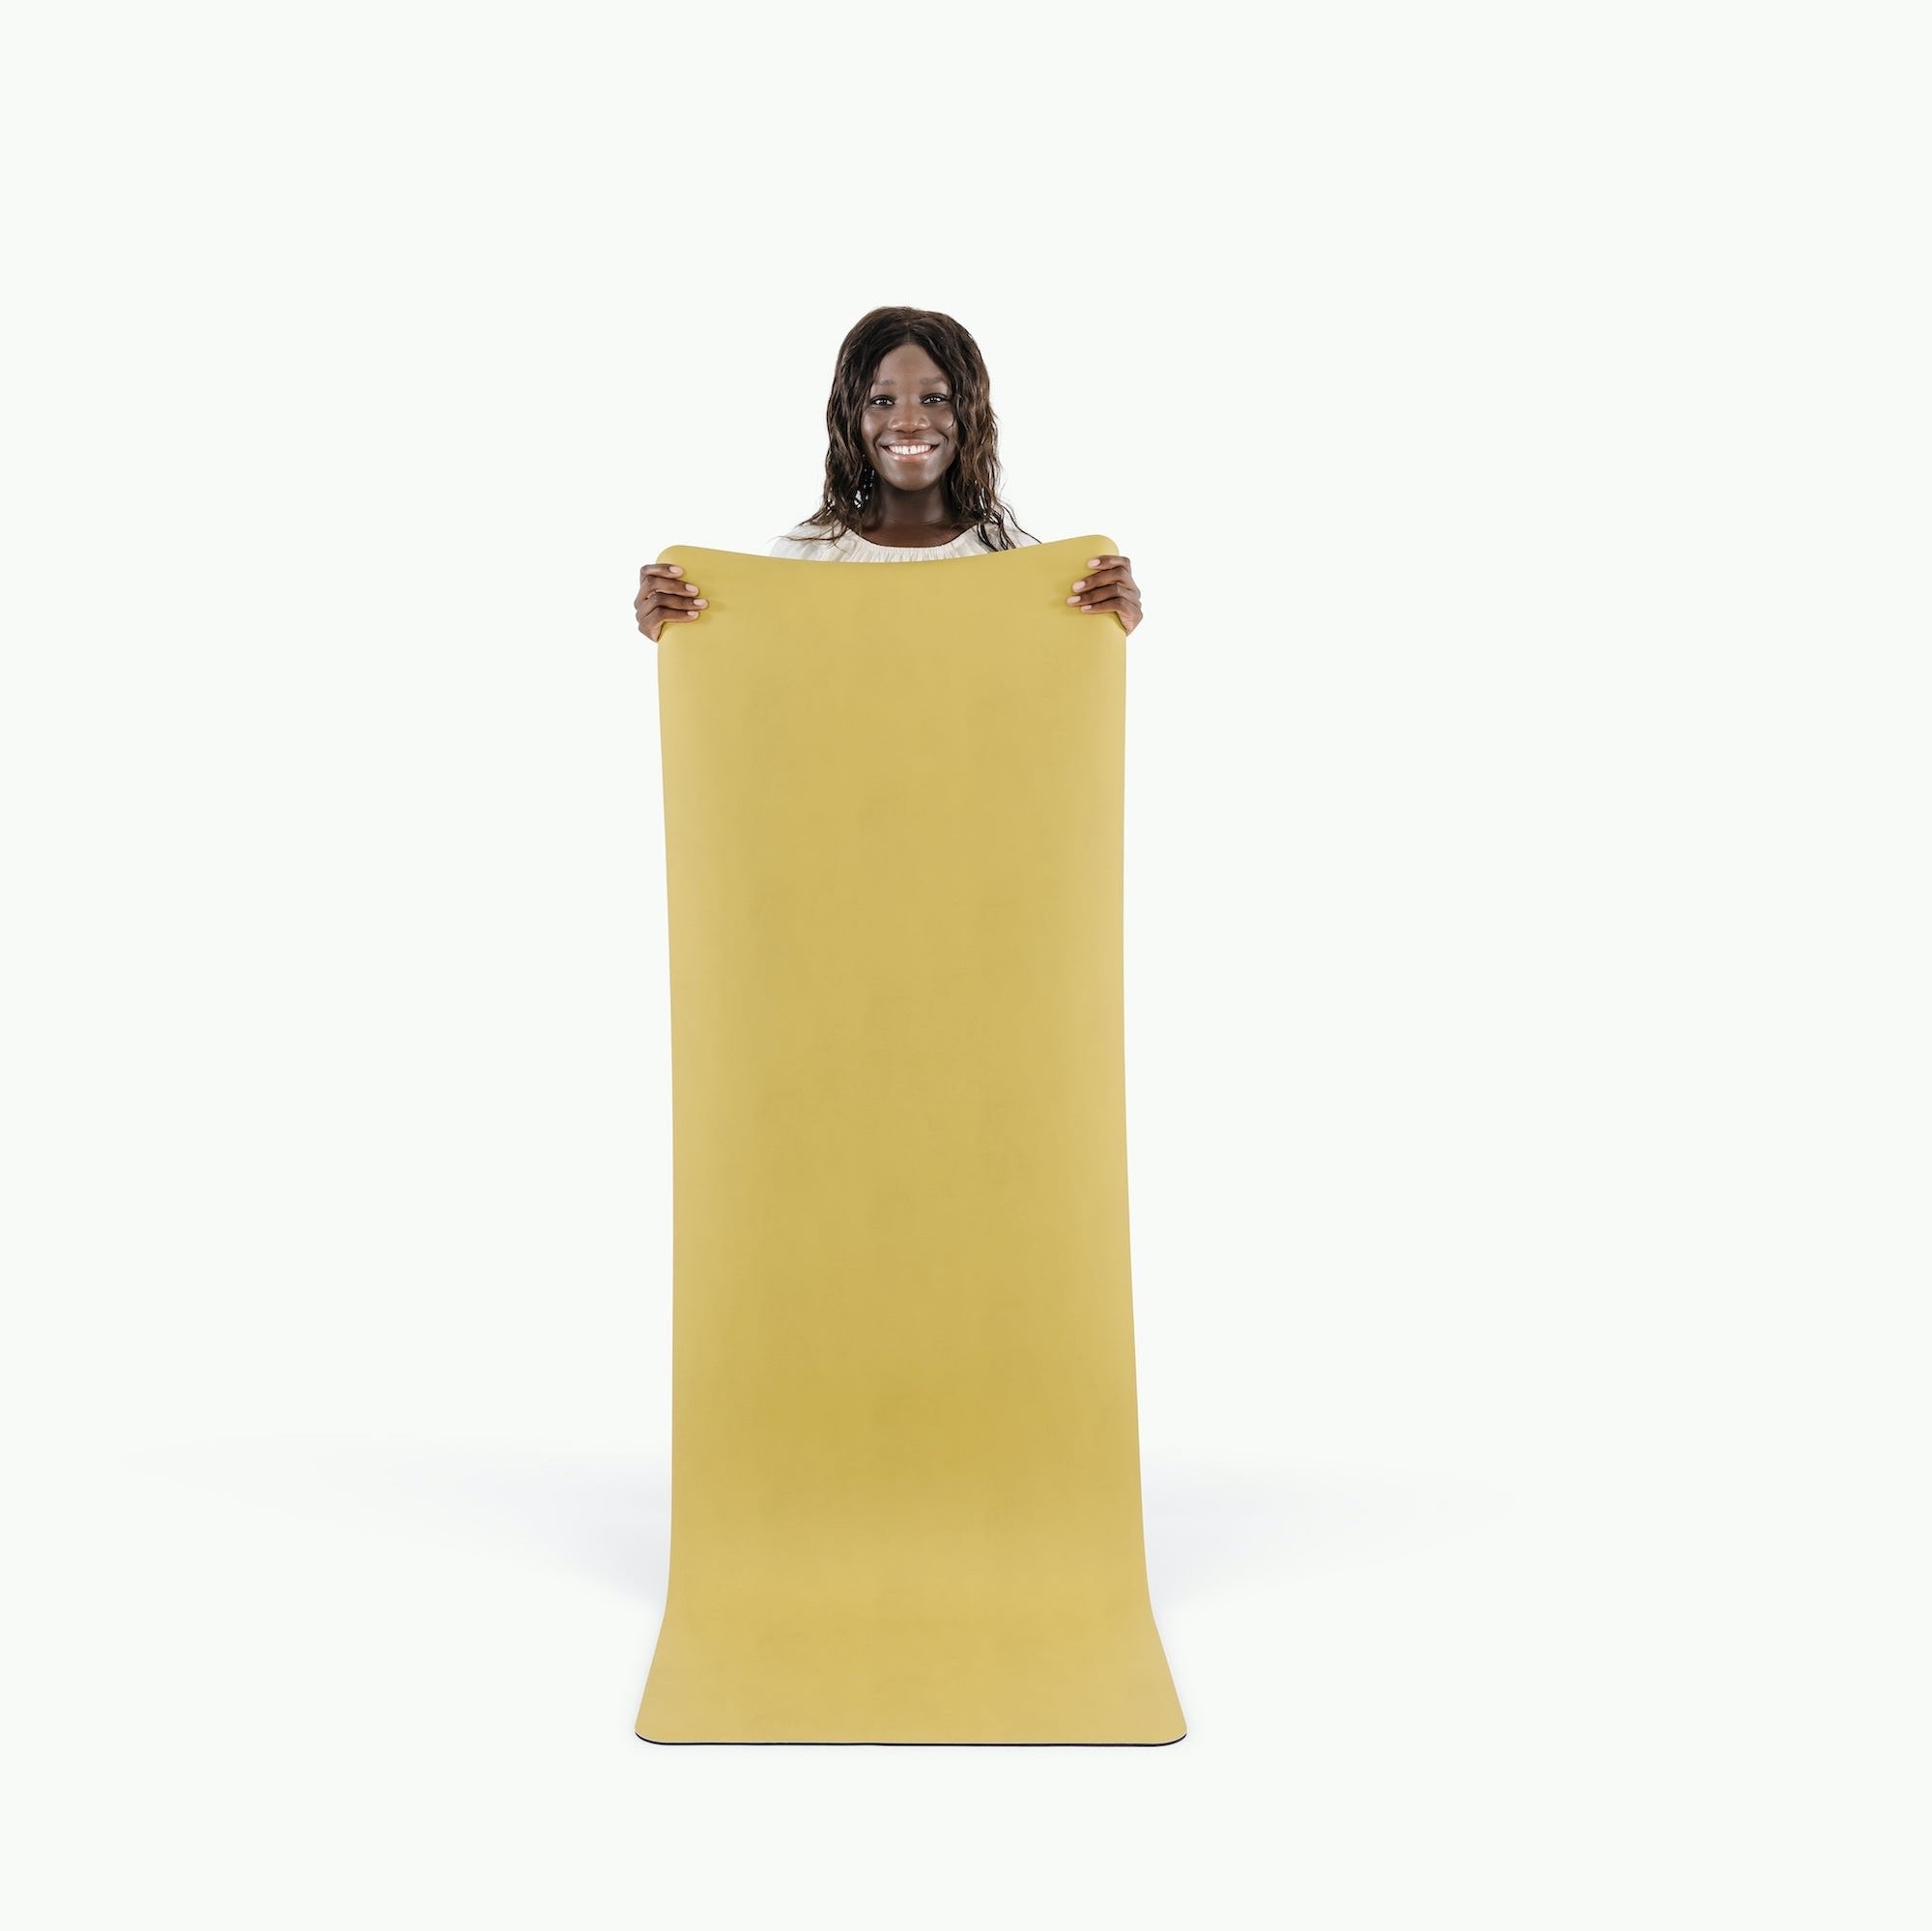 Soleil (on sale)@Woman holding the Large Soleil Home Mat